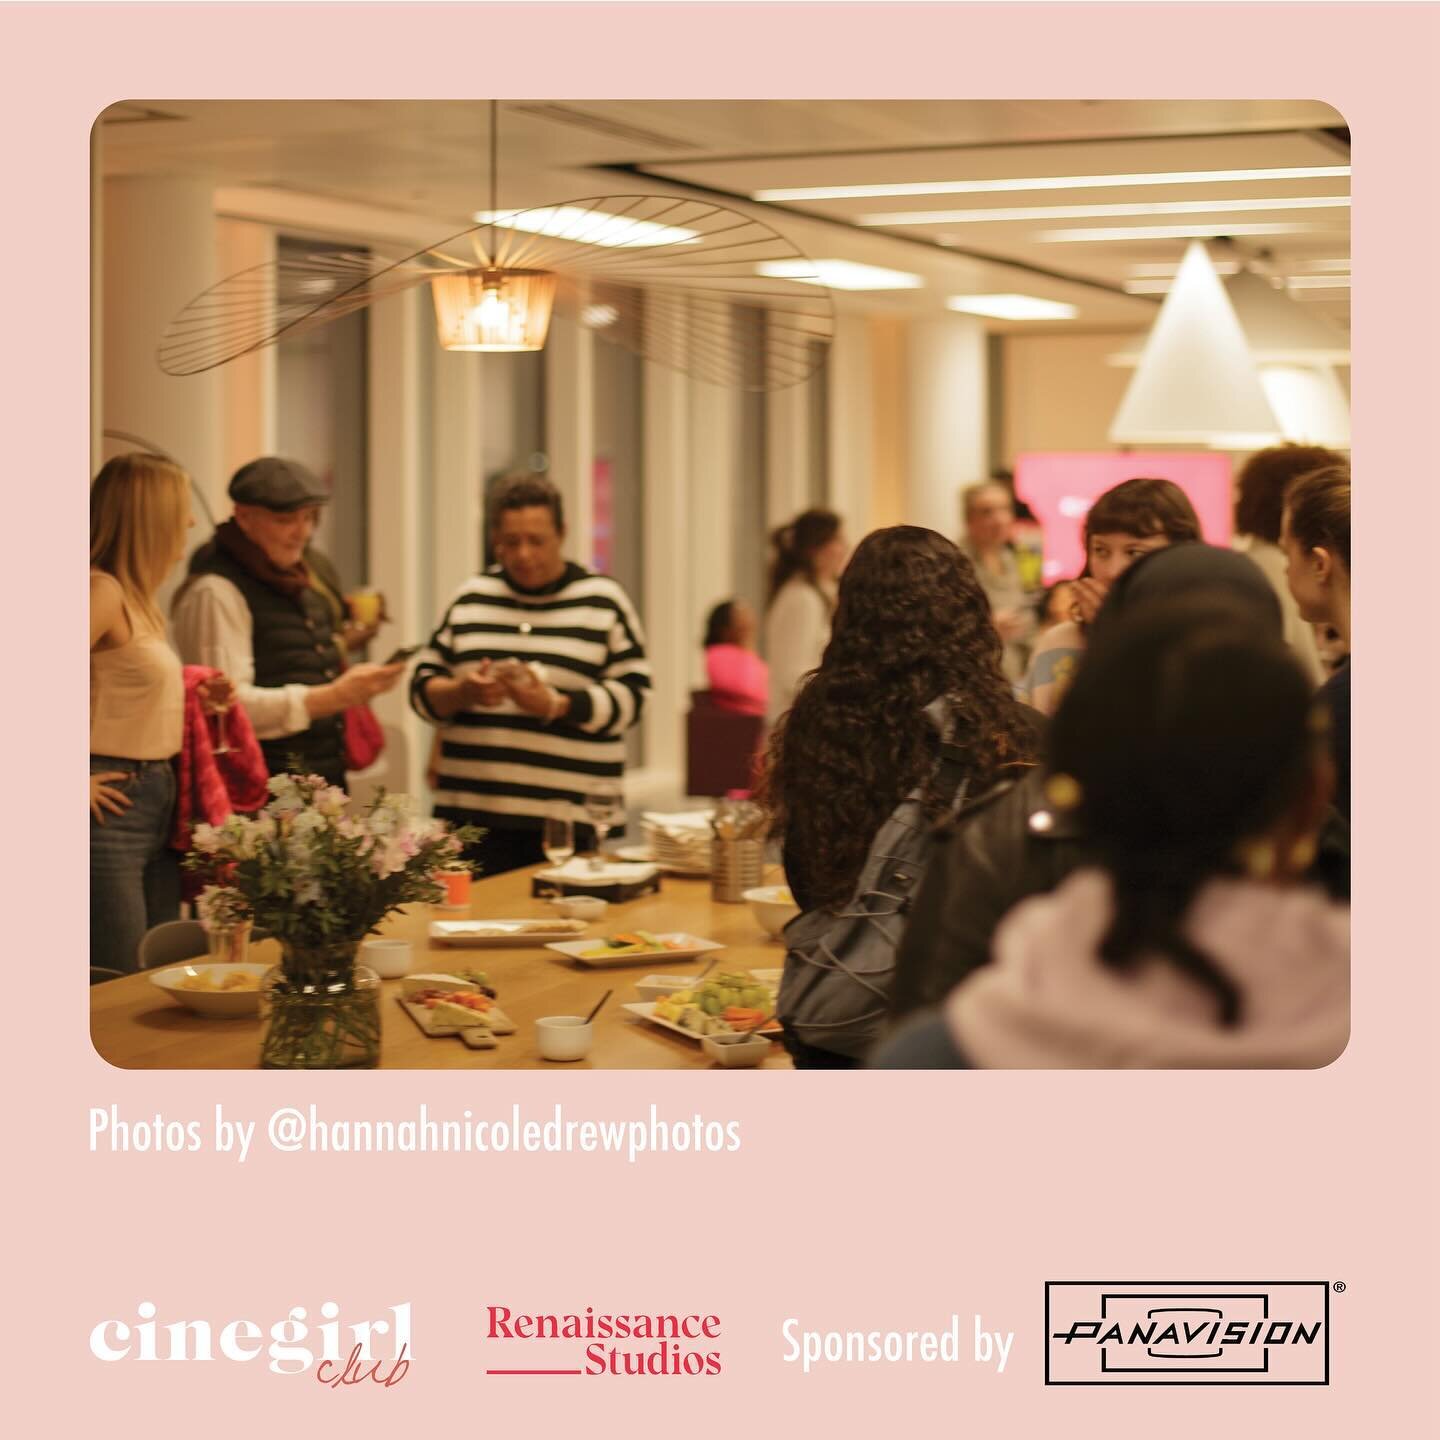 Incoming part 2 

🎉✨ Recap of the CineRenaissance Tech Event ✨🎉

What an incredible evening it was at the CineRenaissance Tech Event! 🌟 On Wednesday 20th March, Cinegirl and Renaissance Studios came together for a celebration of Black women in tec